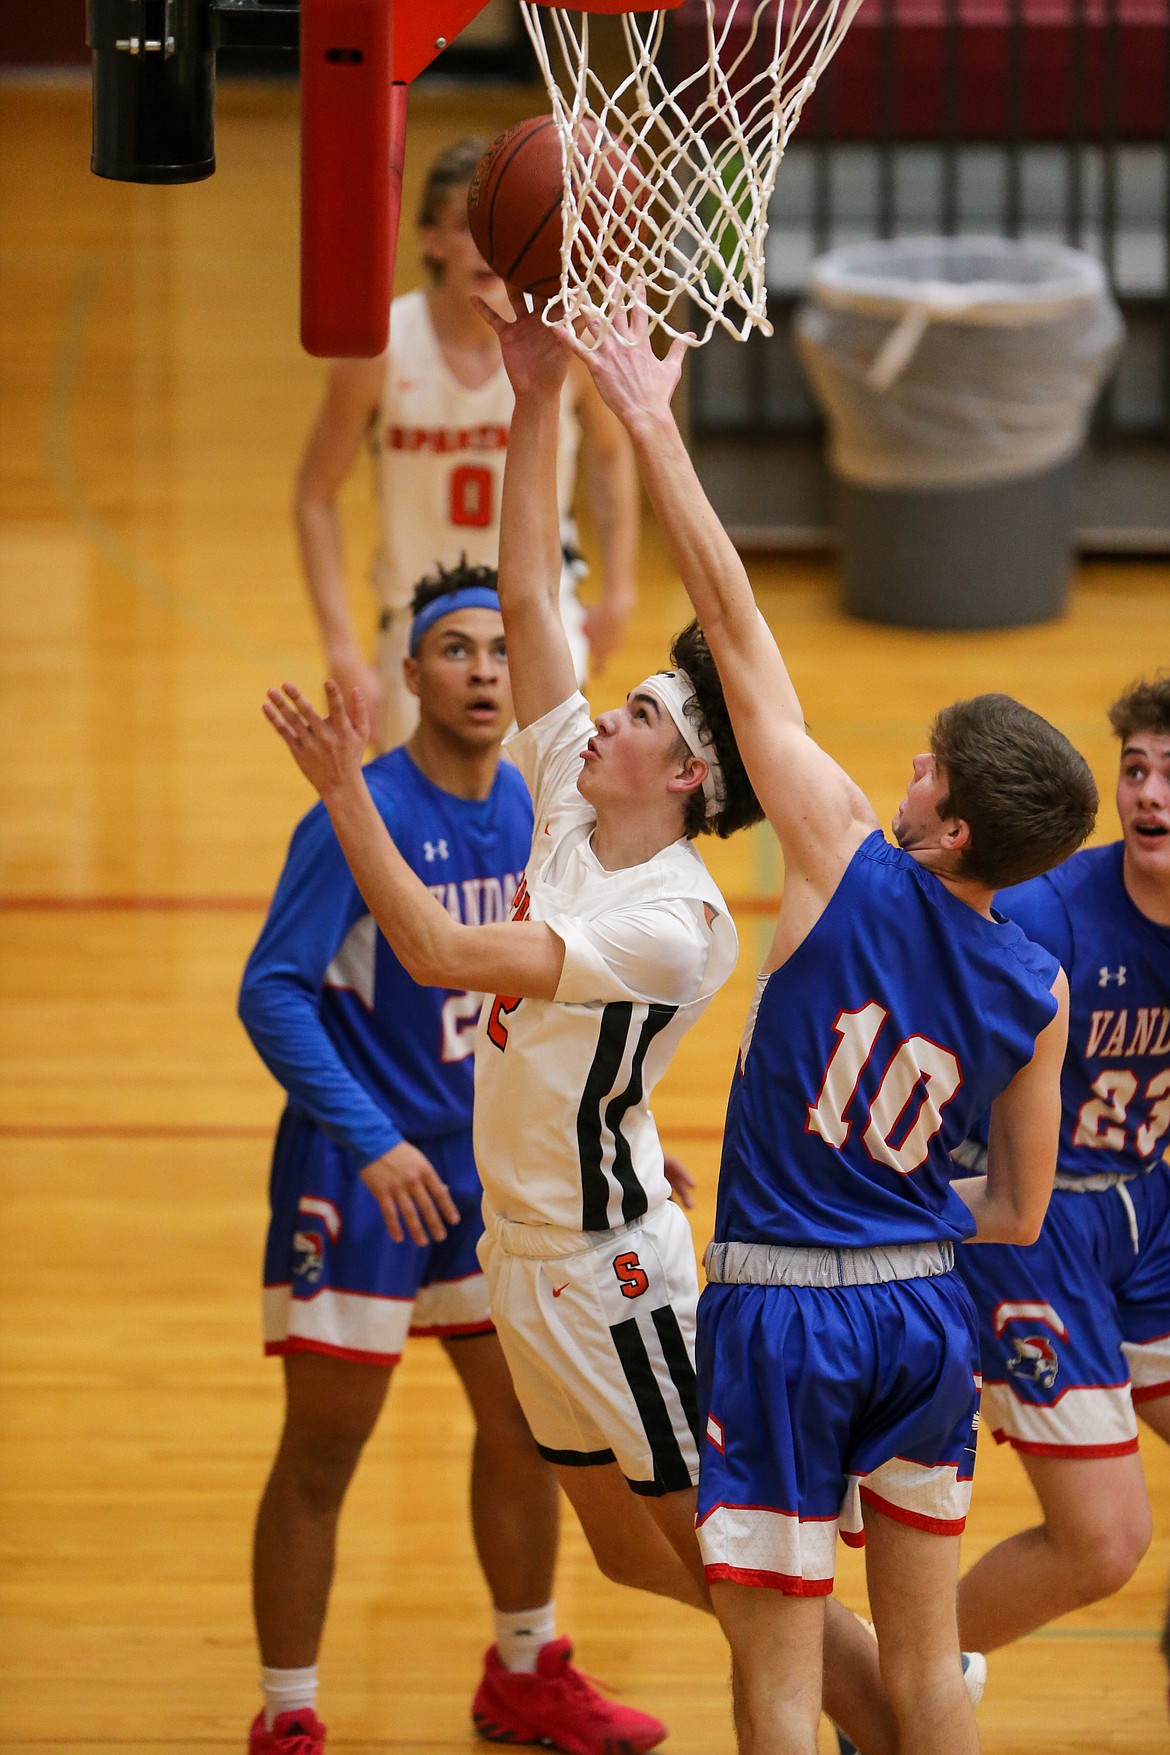 Sophomore Luke Butler converts a layup during Thursday's game against McCall-Donnelly.